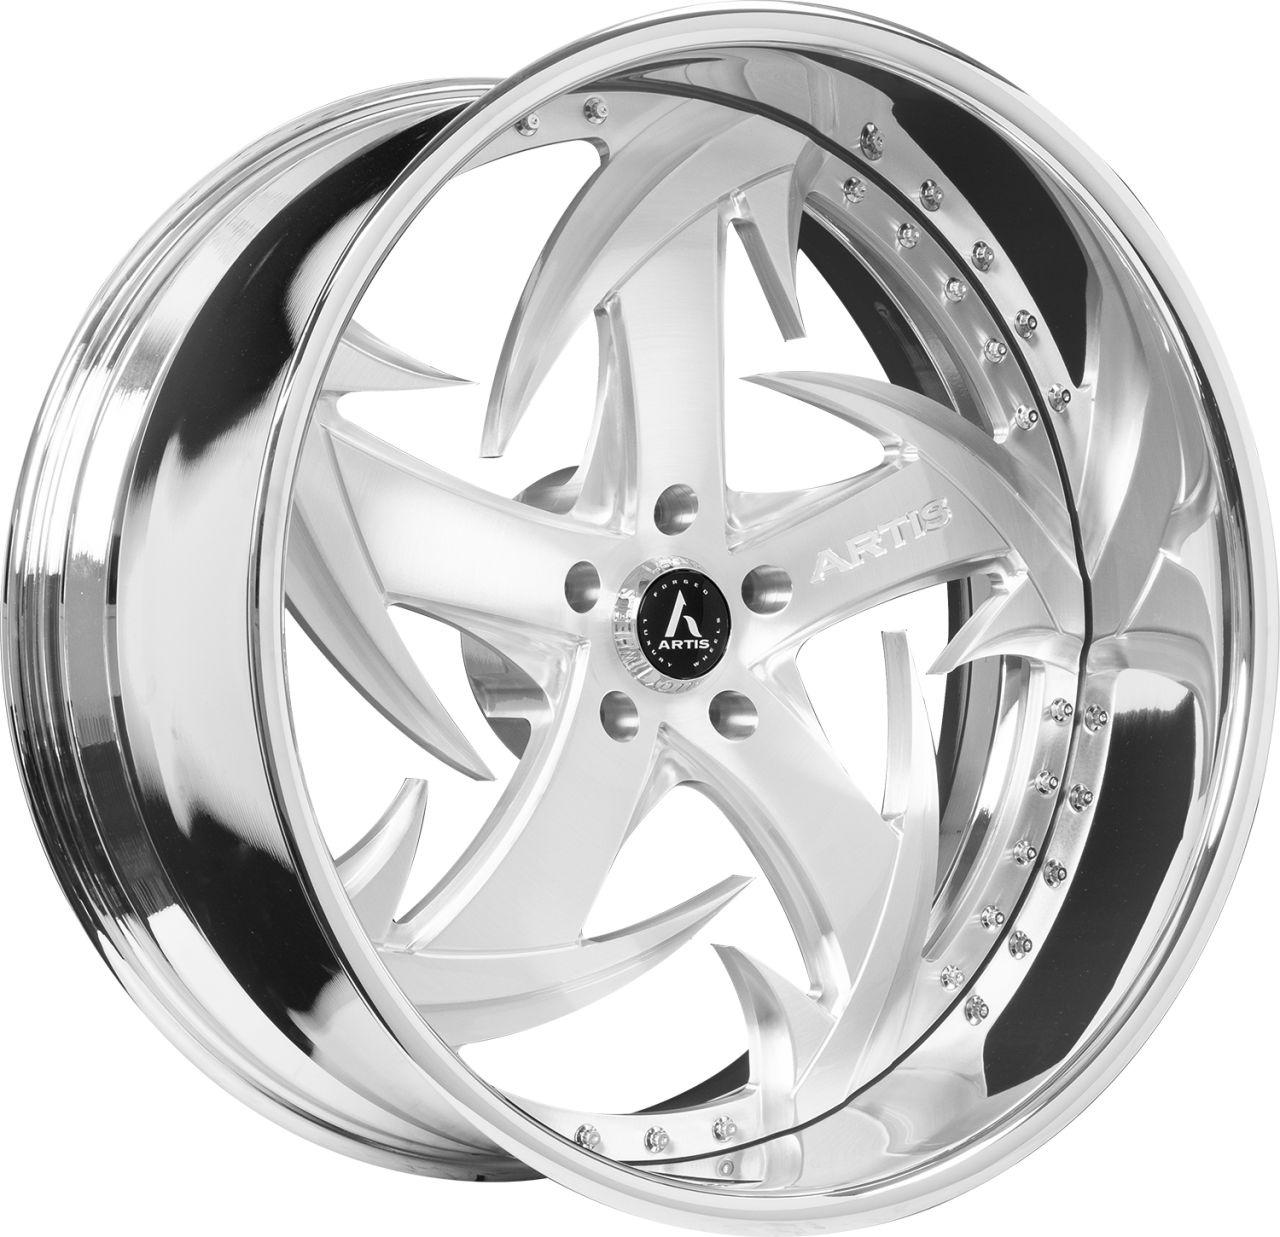 Artis Forged Athens wheel with Brushed finish